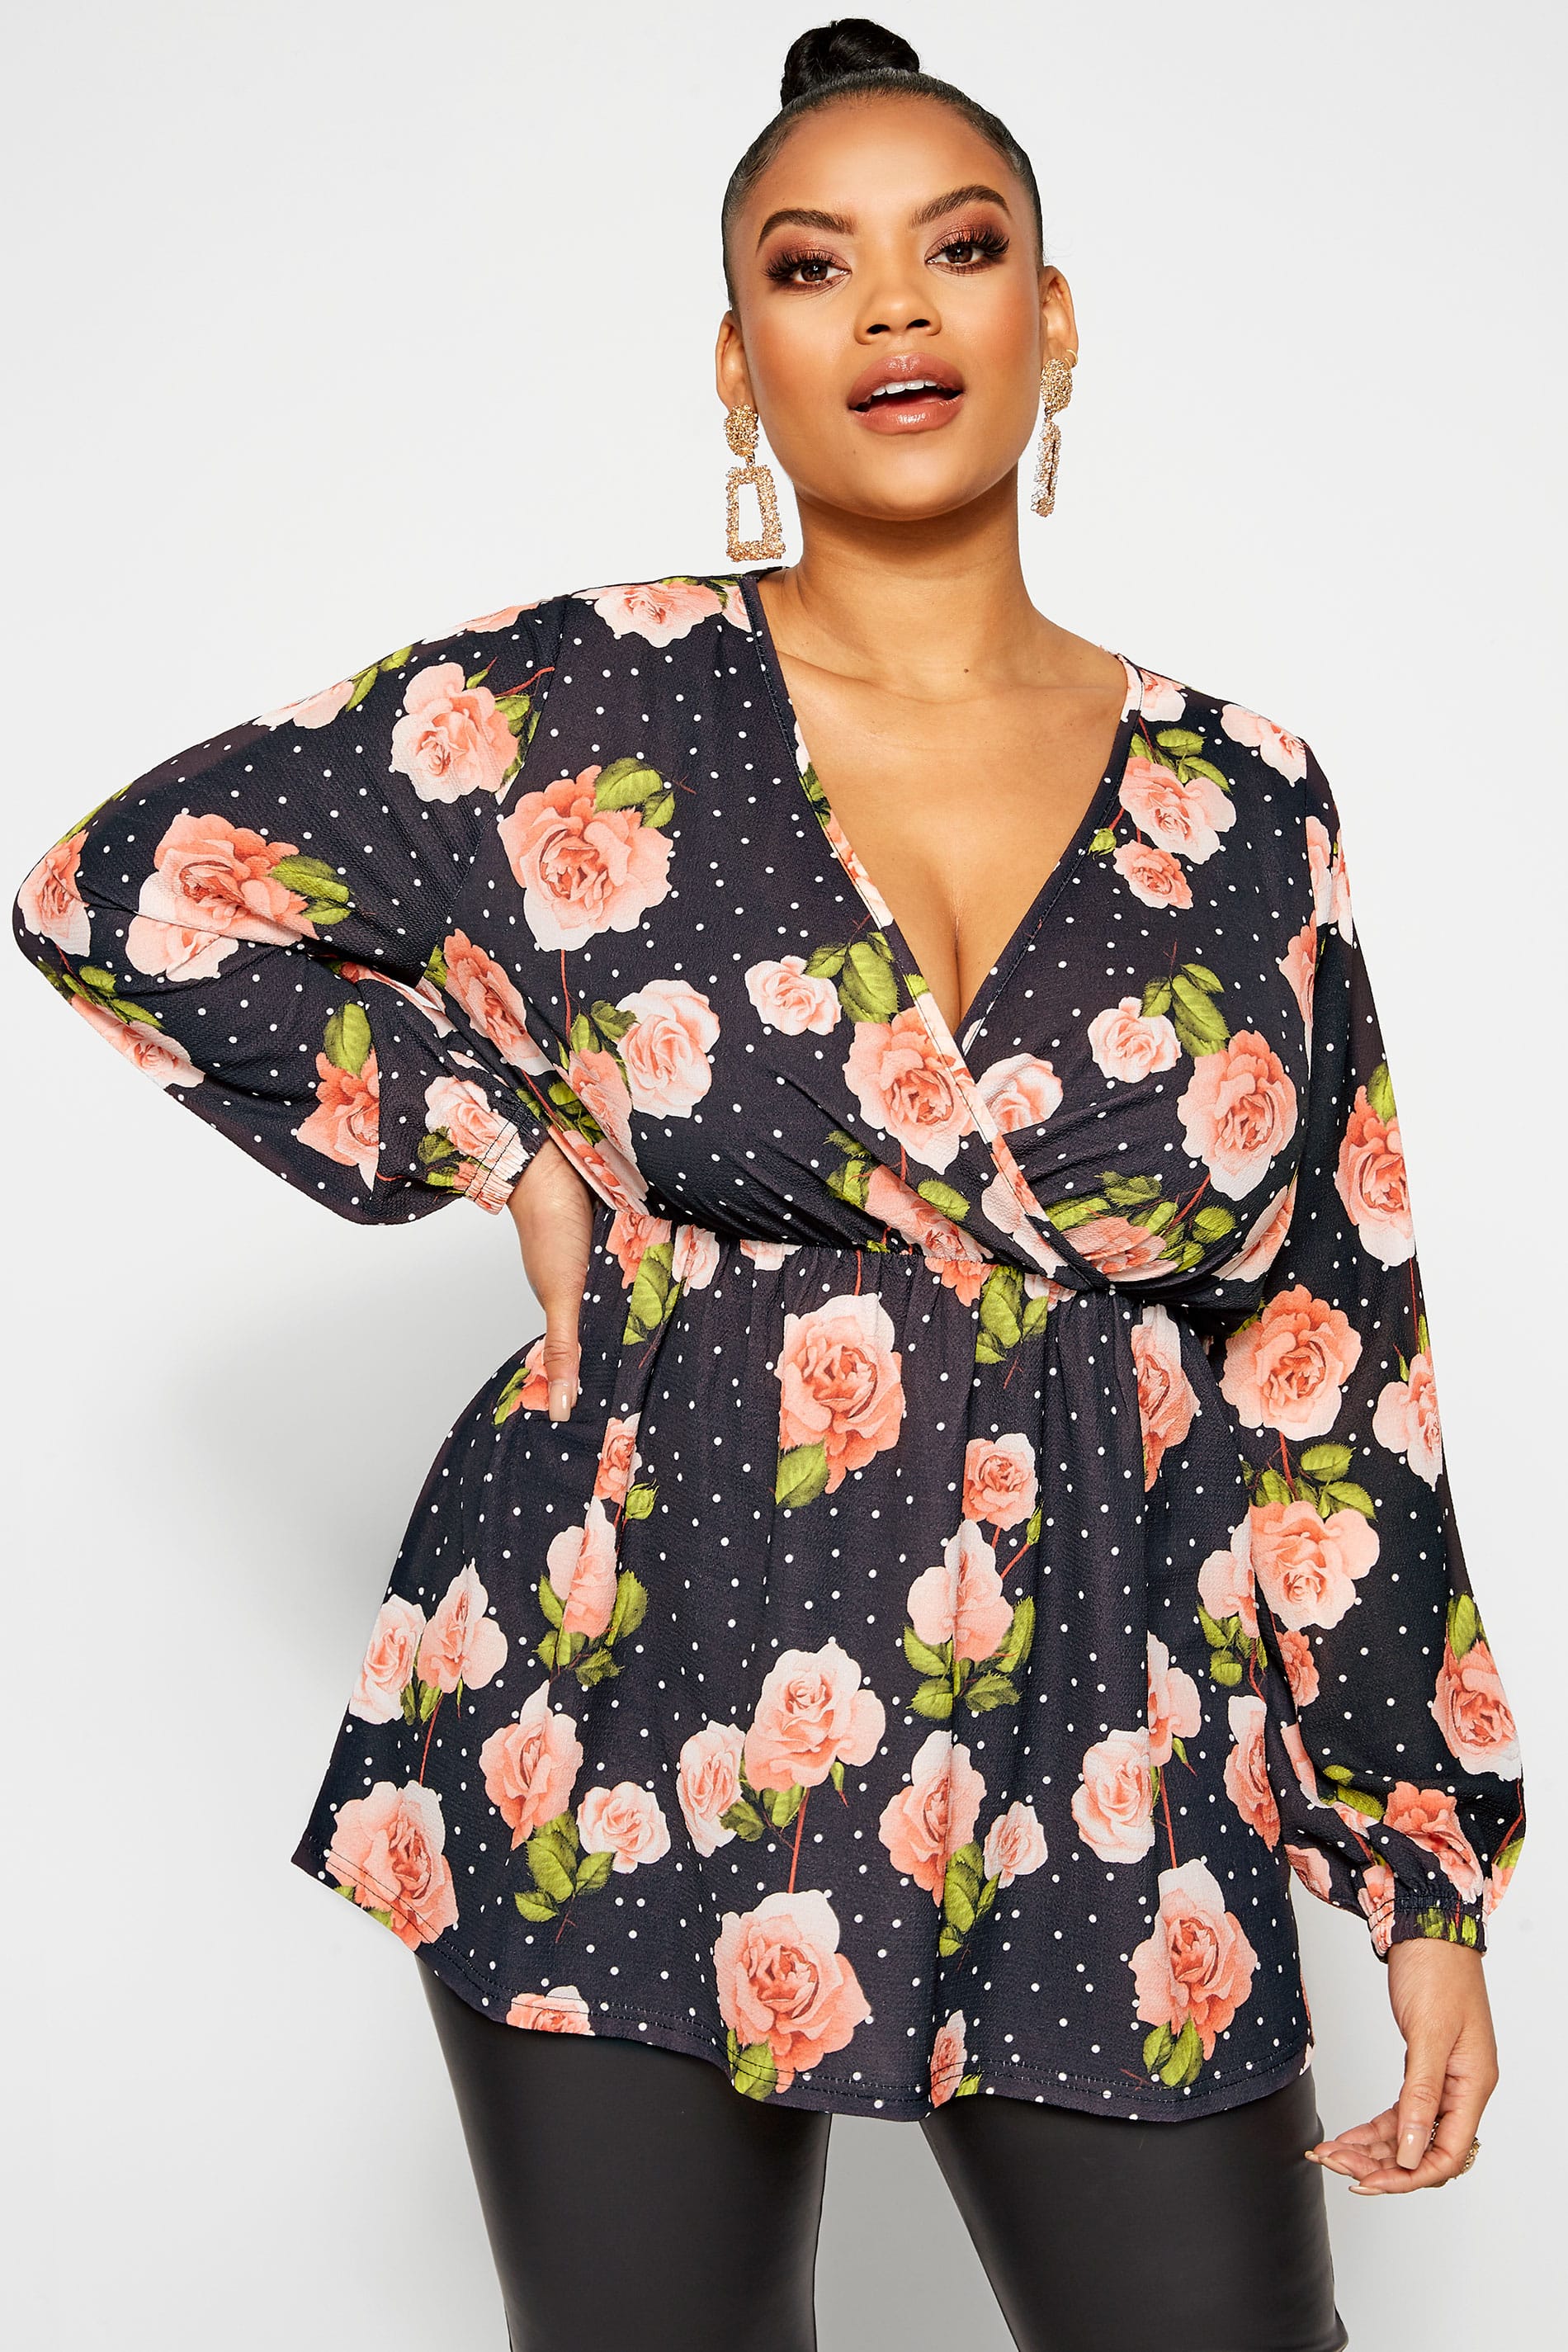 LIMITED COLLECTION Black Floral Polka Dot Wrap Top | Yours Clothing